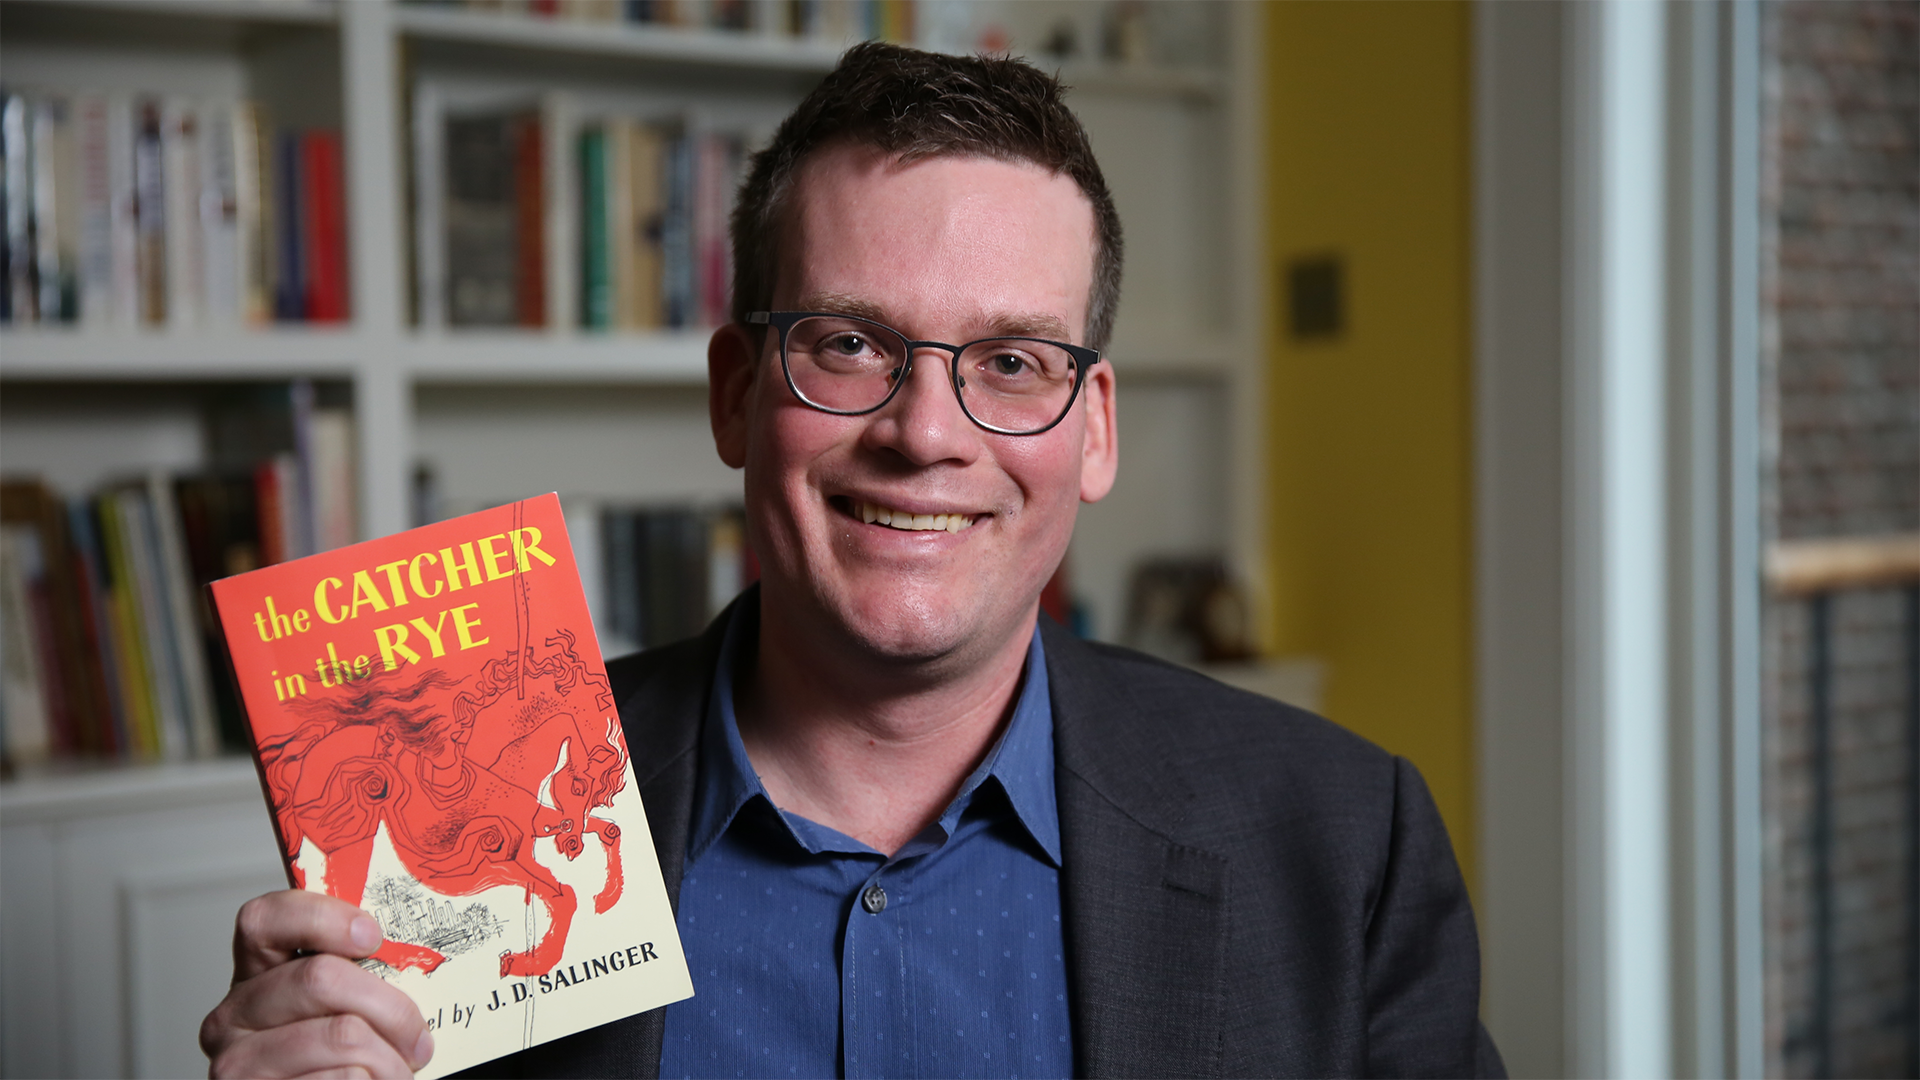 The Catcher in the Rye (J.D. Salinger) - Book Review